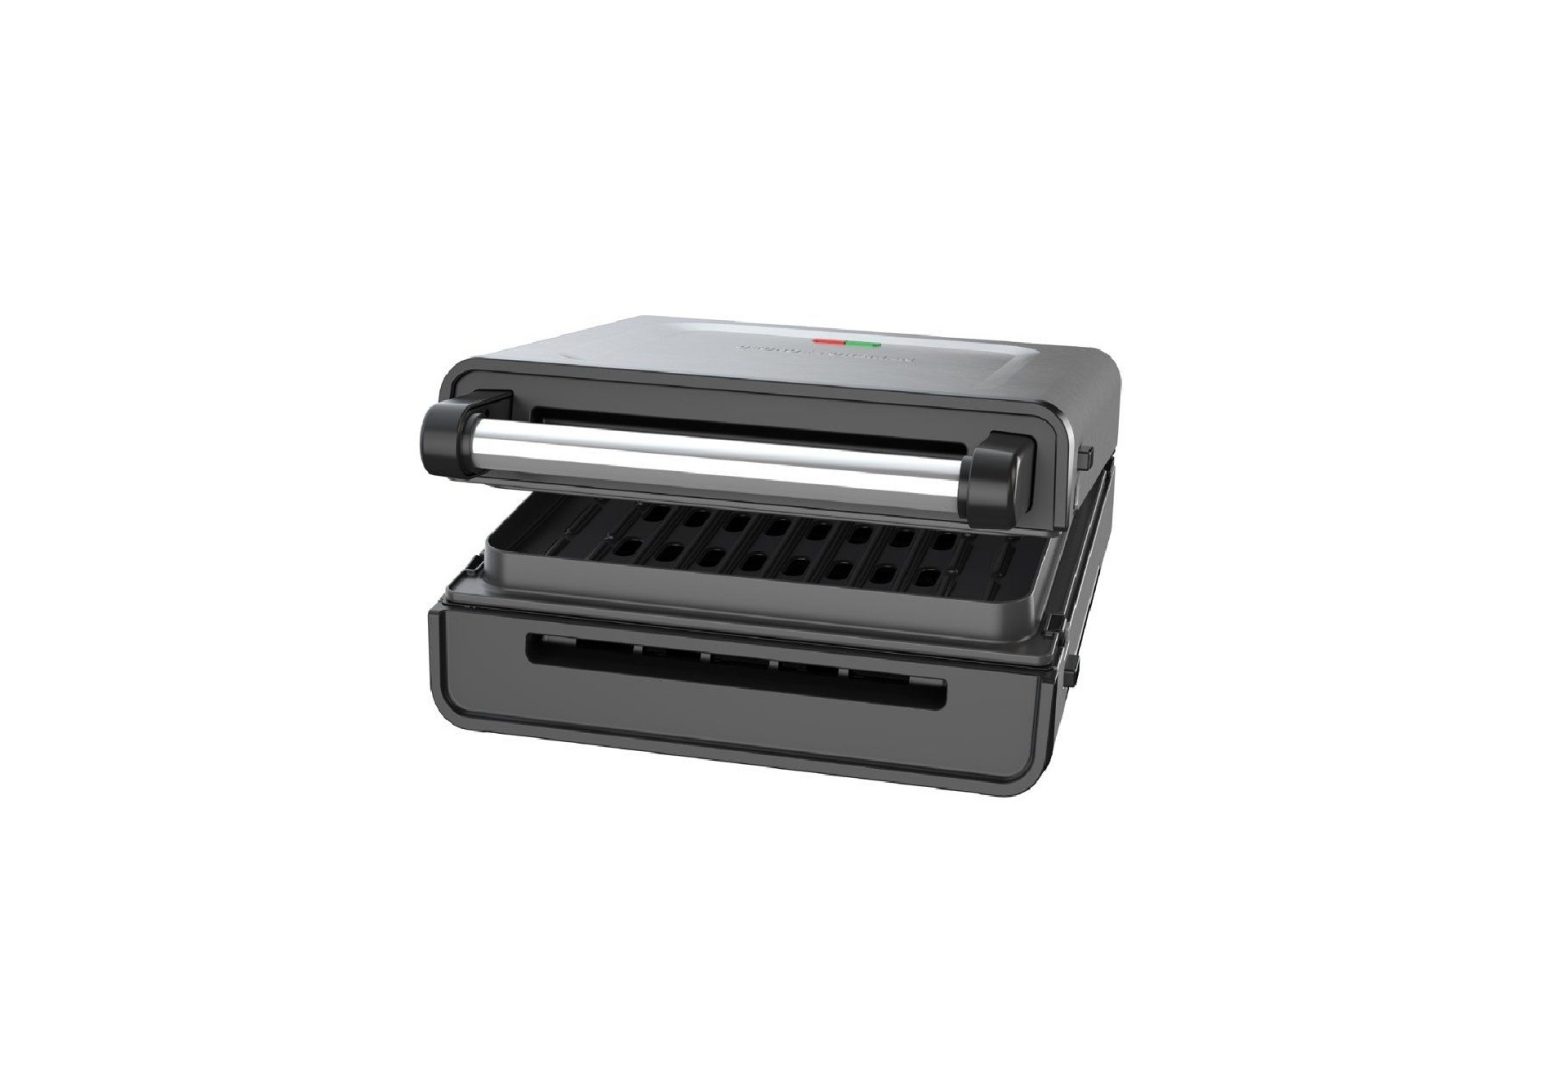 GEORGE FOREMAN GRS6090B Contact Smokeless Grill User Manual